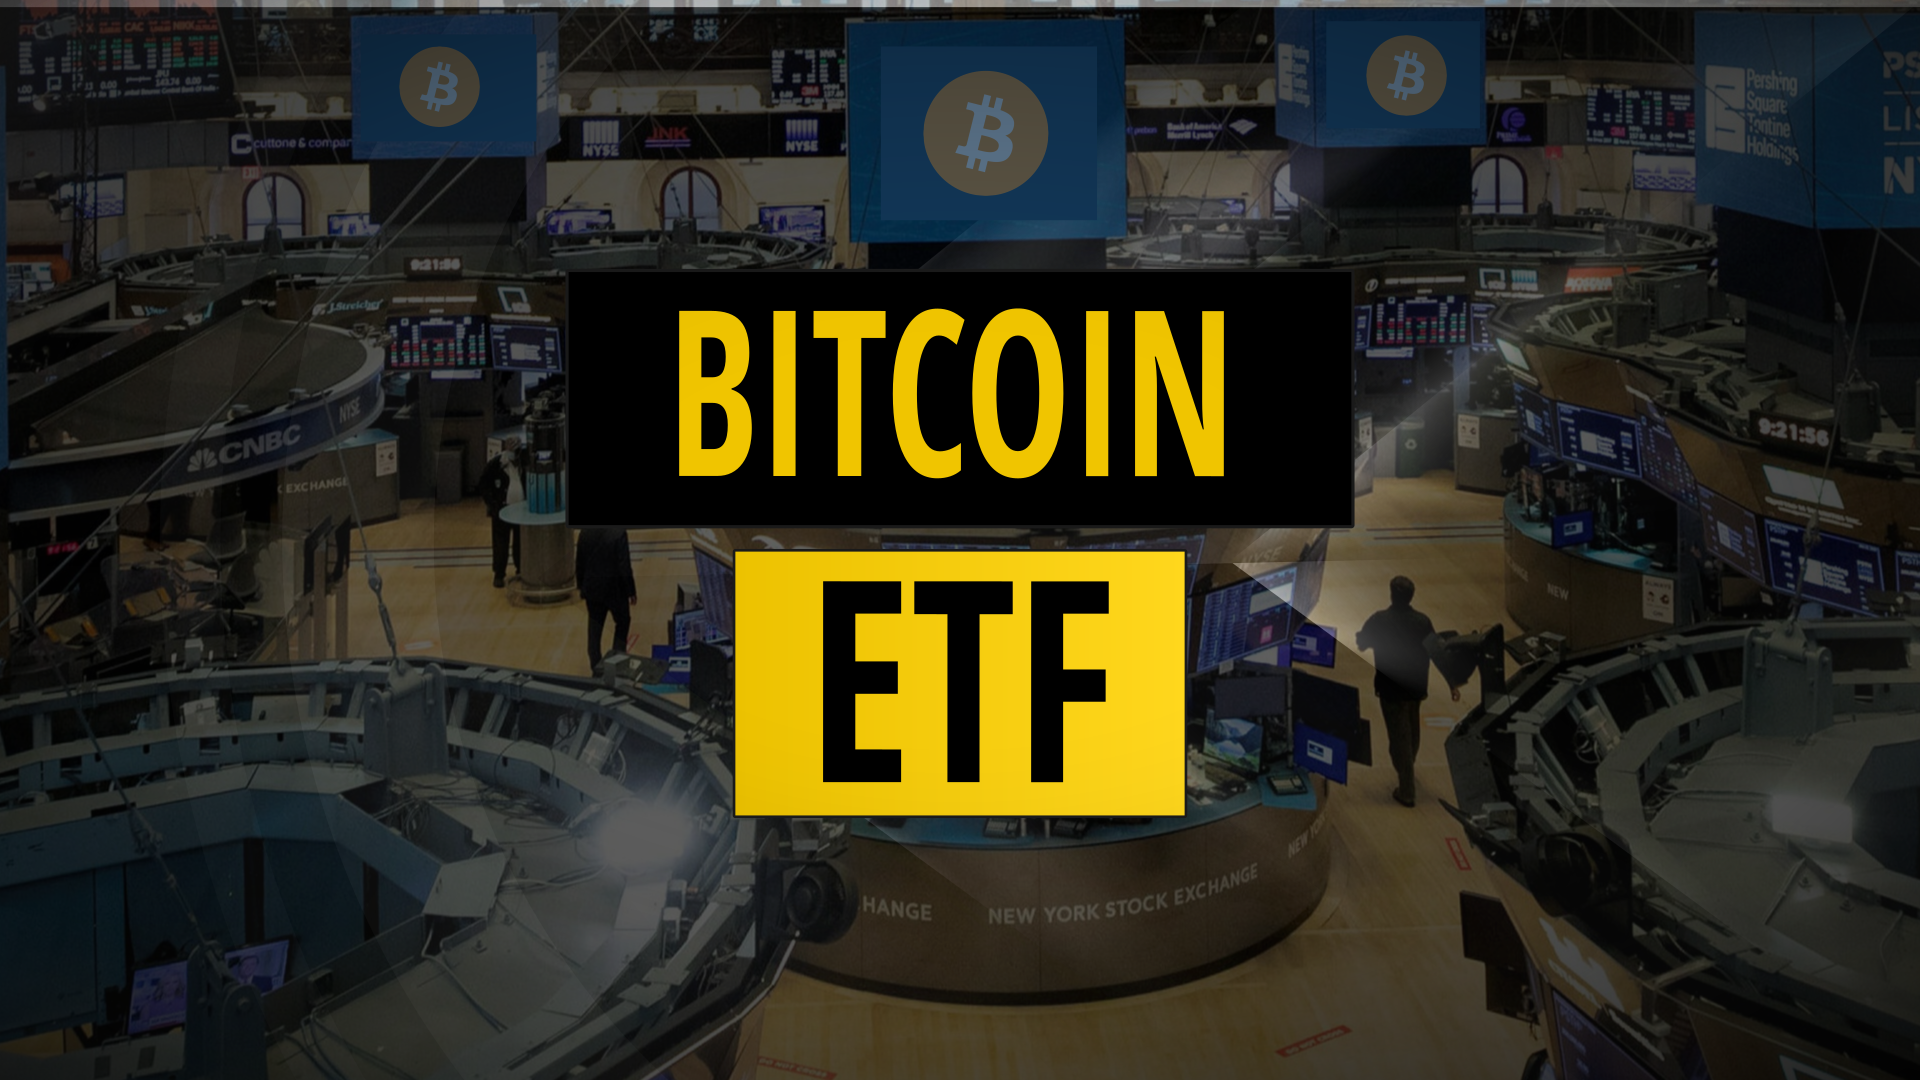 Bitcoin ETF | Why A Bitcoin ETF Changes Everything